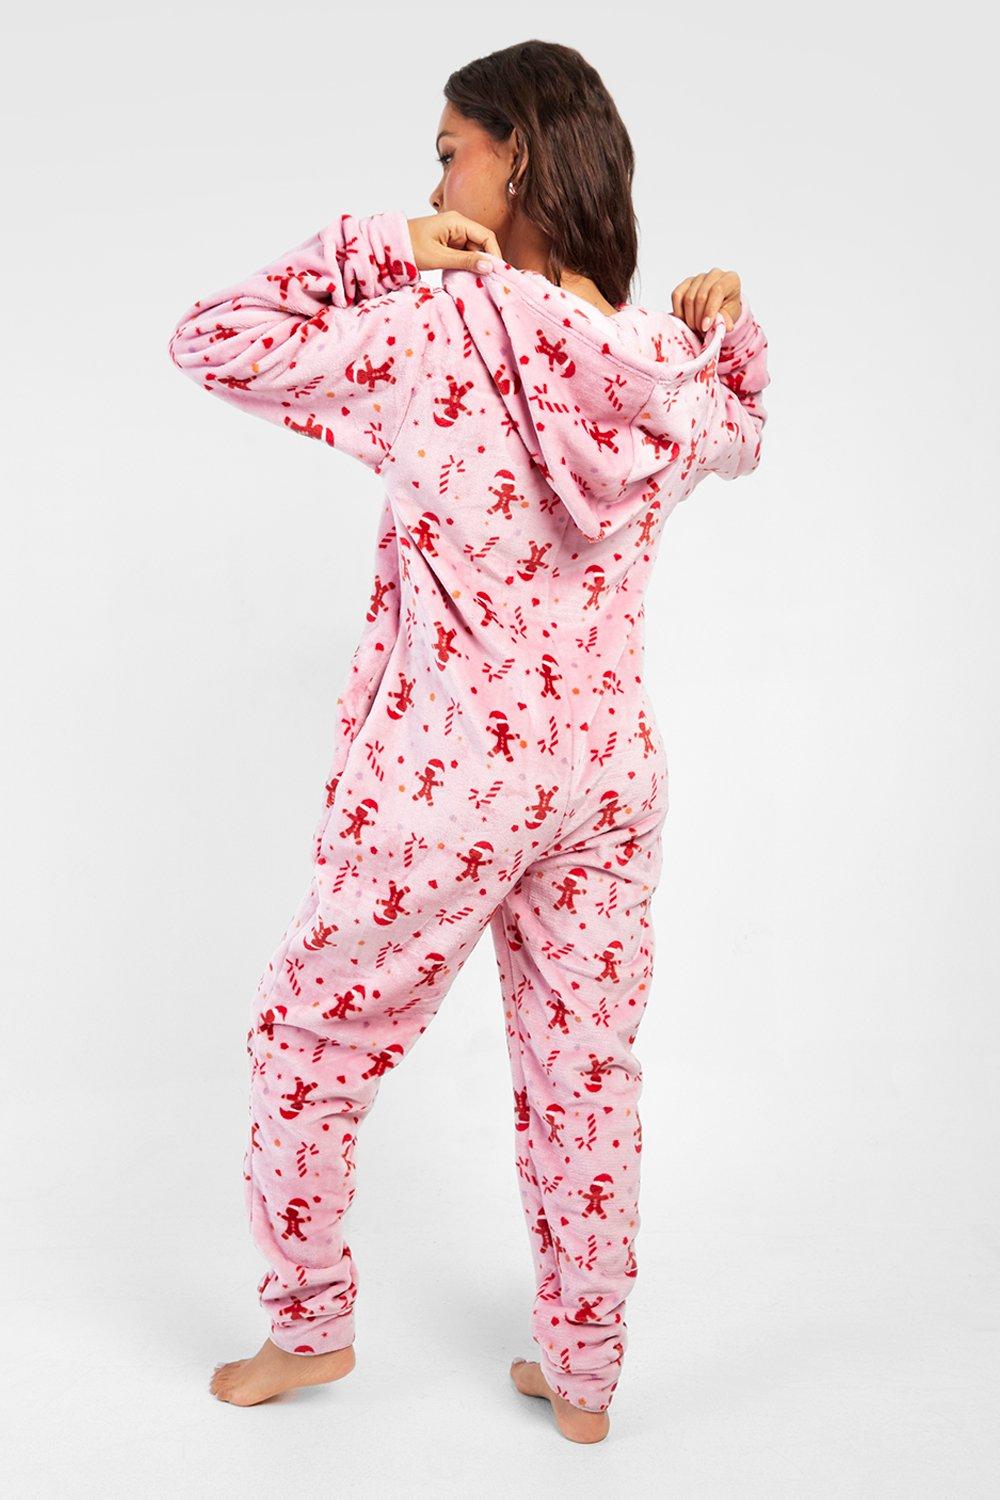 Gingerbread & Candy Cane Novelty Onesie